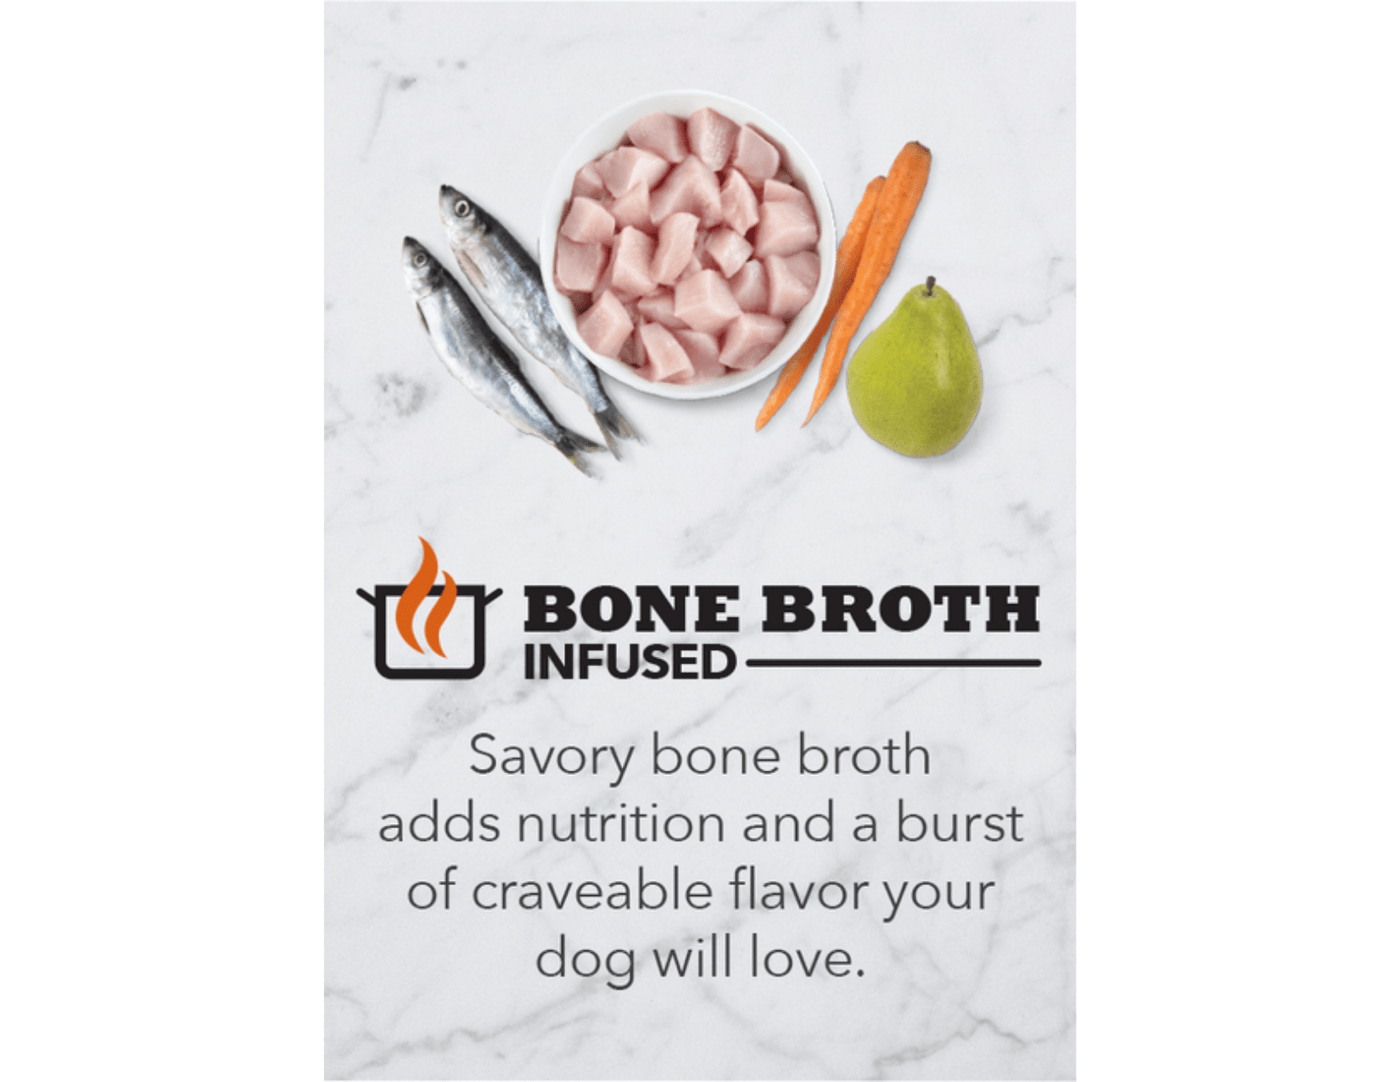 ACANA Bone Broth Infused Freeze-Dried Patties/Morsels for Dogs - Free-Run Chicken Recipe - Freeze Dried Dog Food - ACANA - PetToba-ACANA